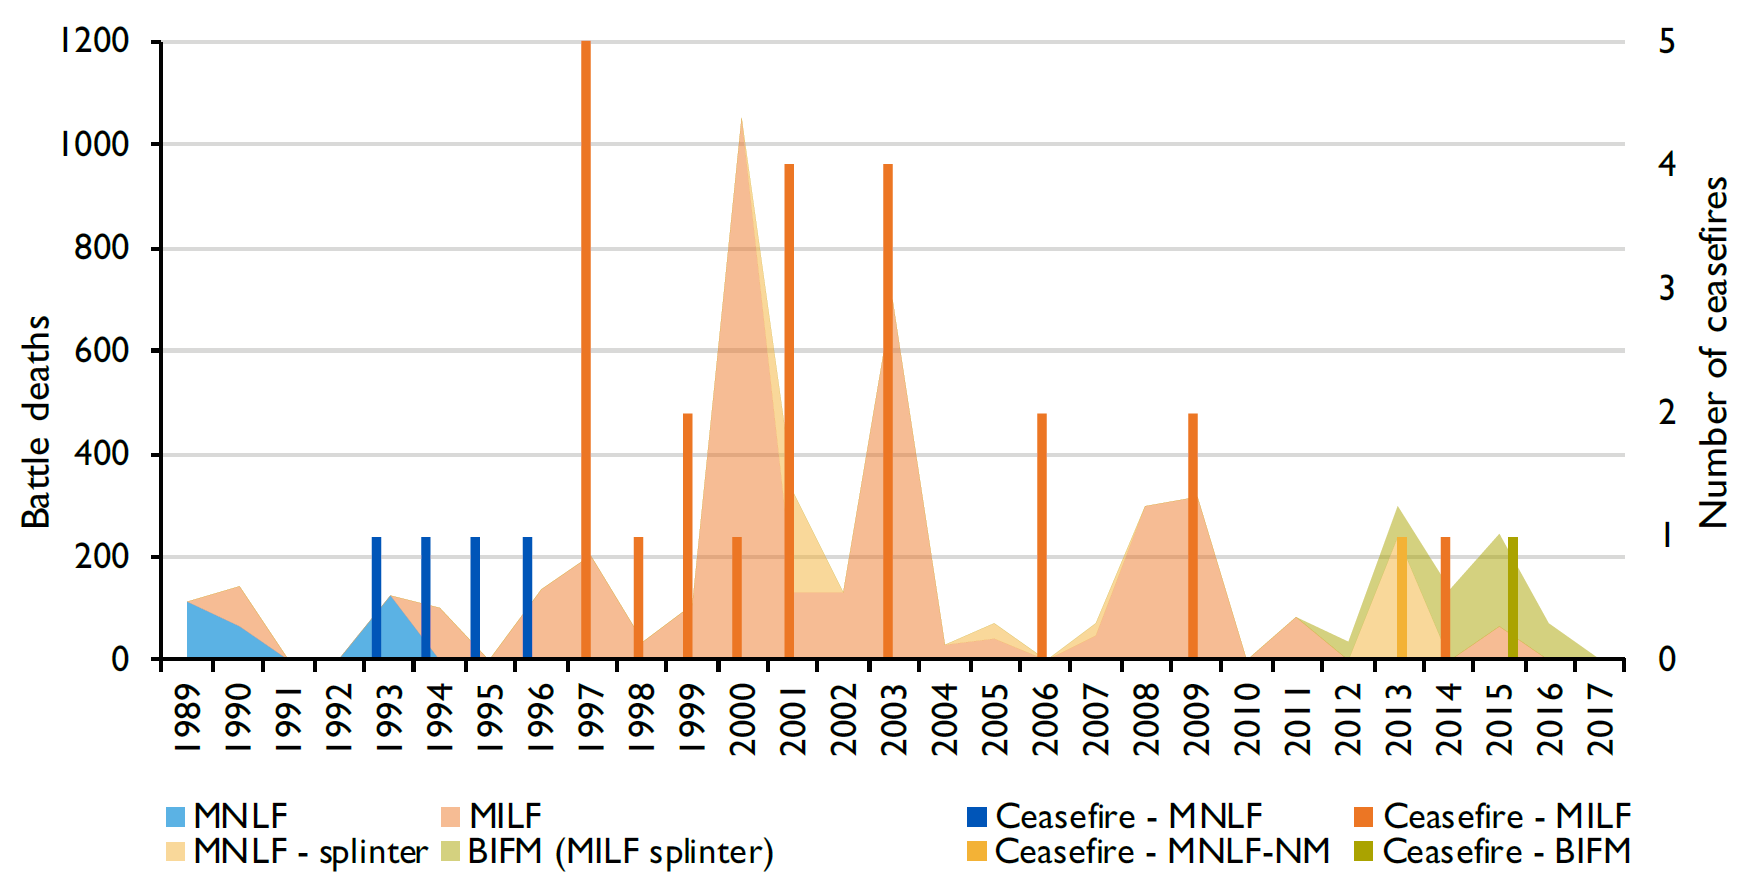 Figure 4: Level of battle-related deaths and ceasefires in the Mindanao conflict between 2011 and 2017 by actor. Source: ETH-PRIO Ceasefire Dataset and UCDP Battle-Related Deaths Dataset 18.1